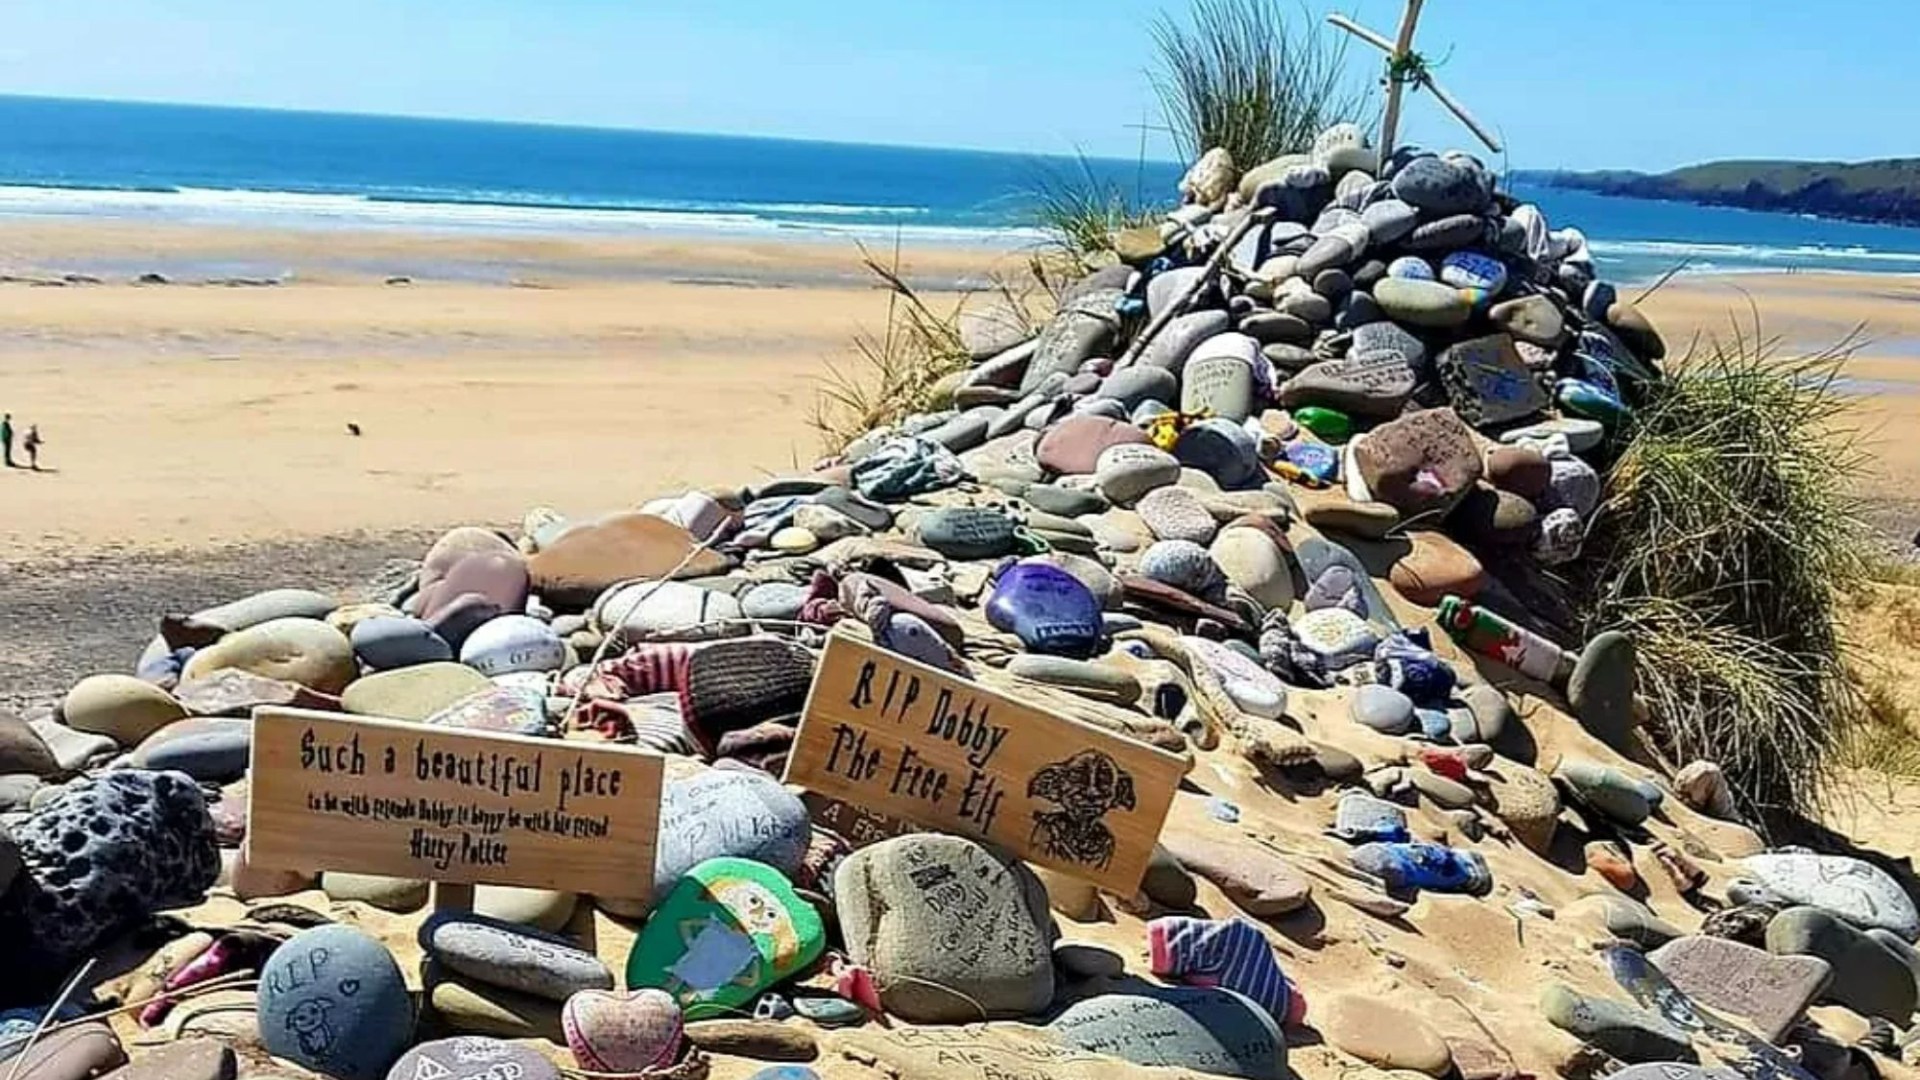 Our famous beach is being destroyed by fans of huge film franchise – tourists cover sand in rubbish… we’re fighting back